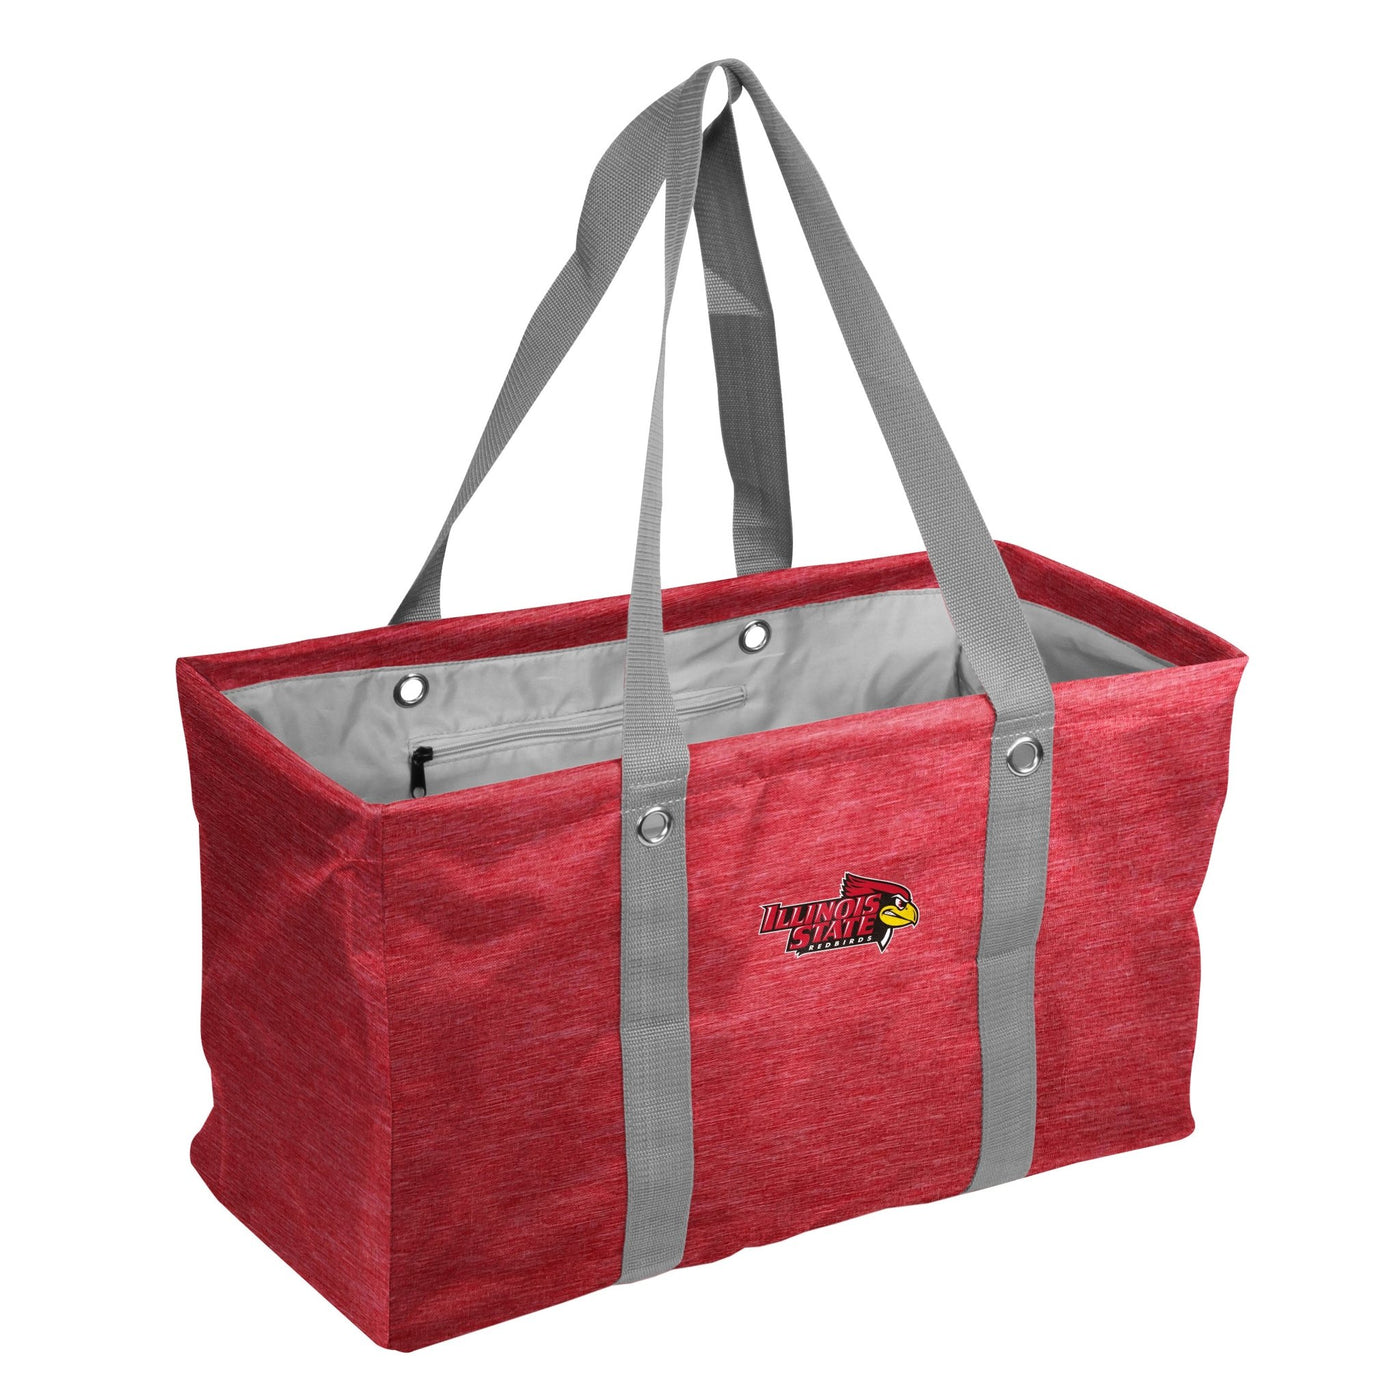 Illinois State Picnic Caddy - Logo Brands